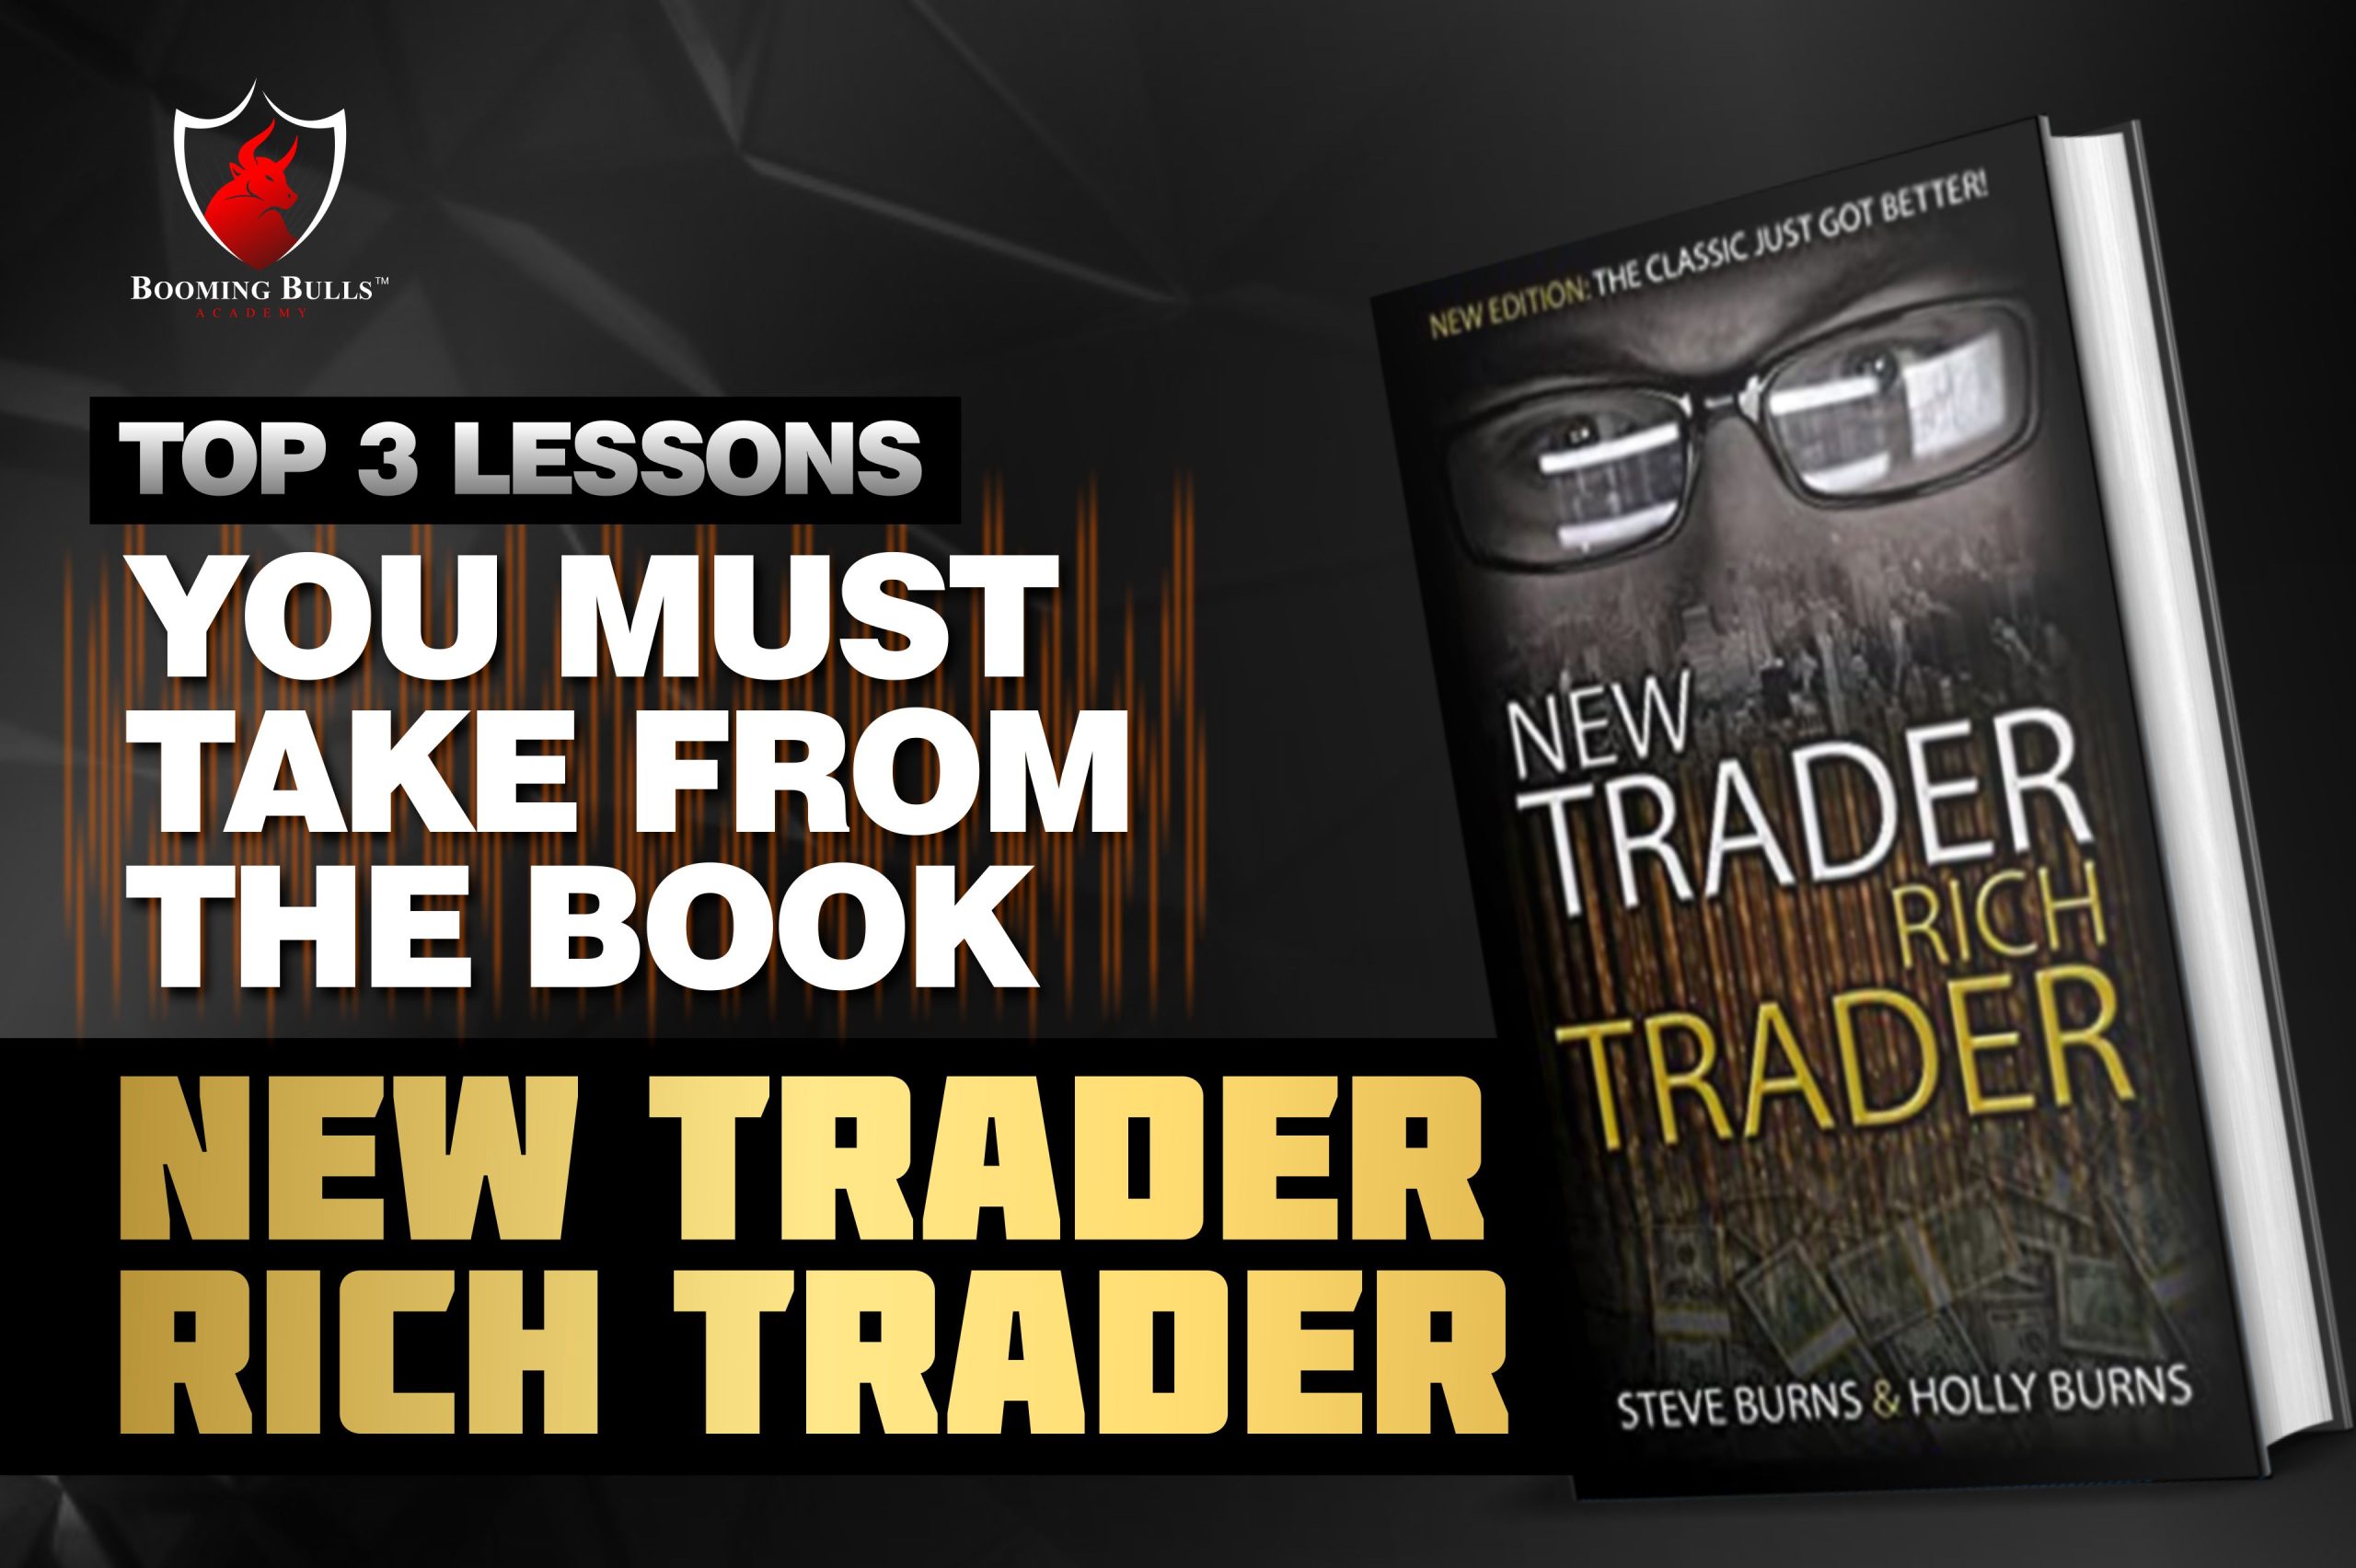 Top 3 lessons you must take from the book ‘New Trader Rich Trader’